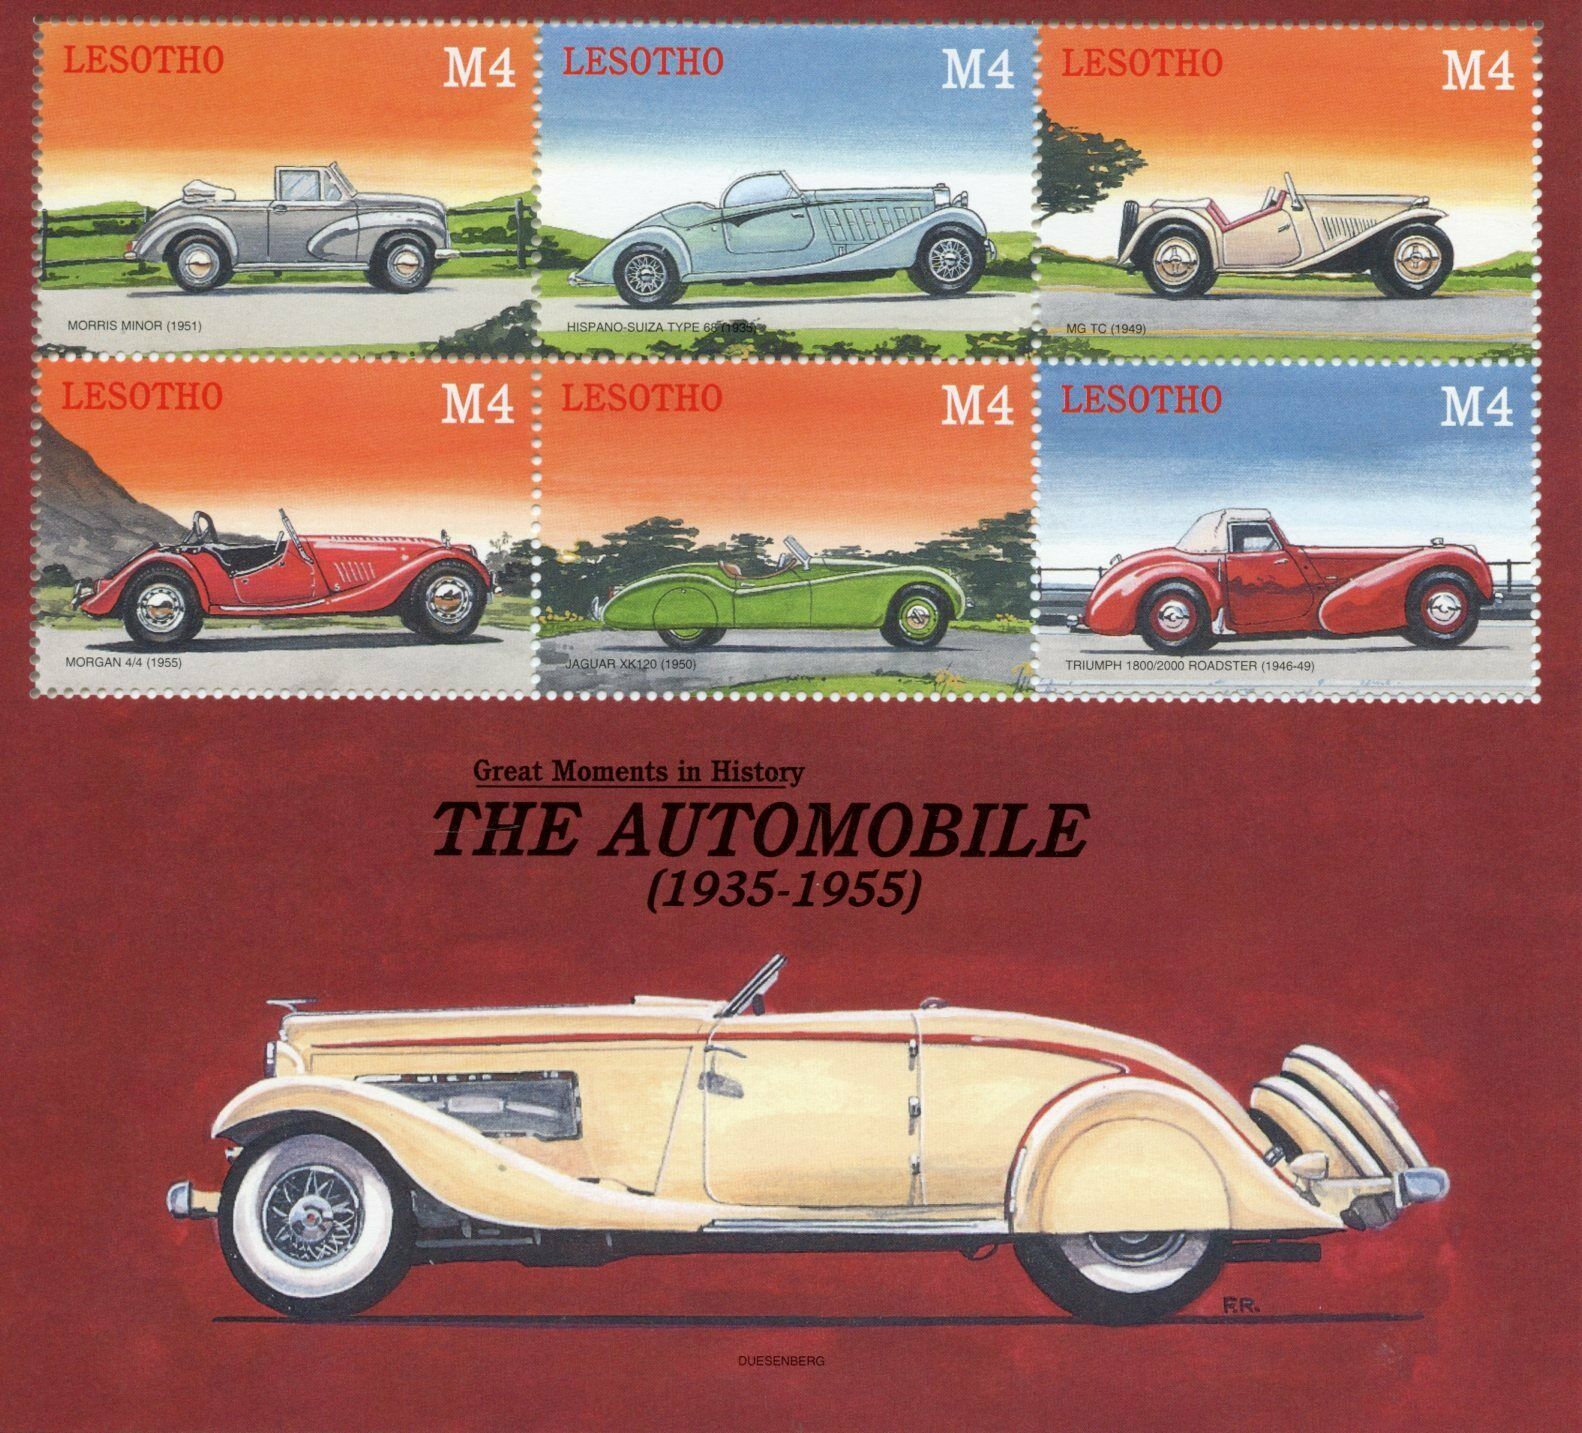 Lesotho 2001 MNH Cars Stamps Automobile Great Moments History 6v M/S III